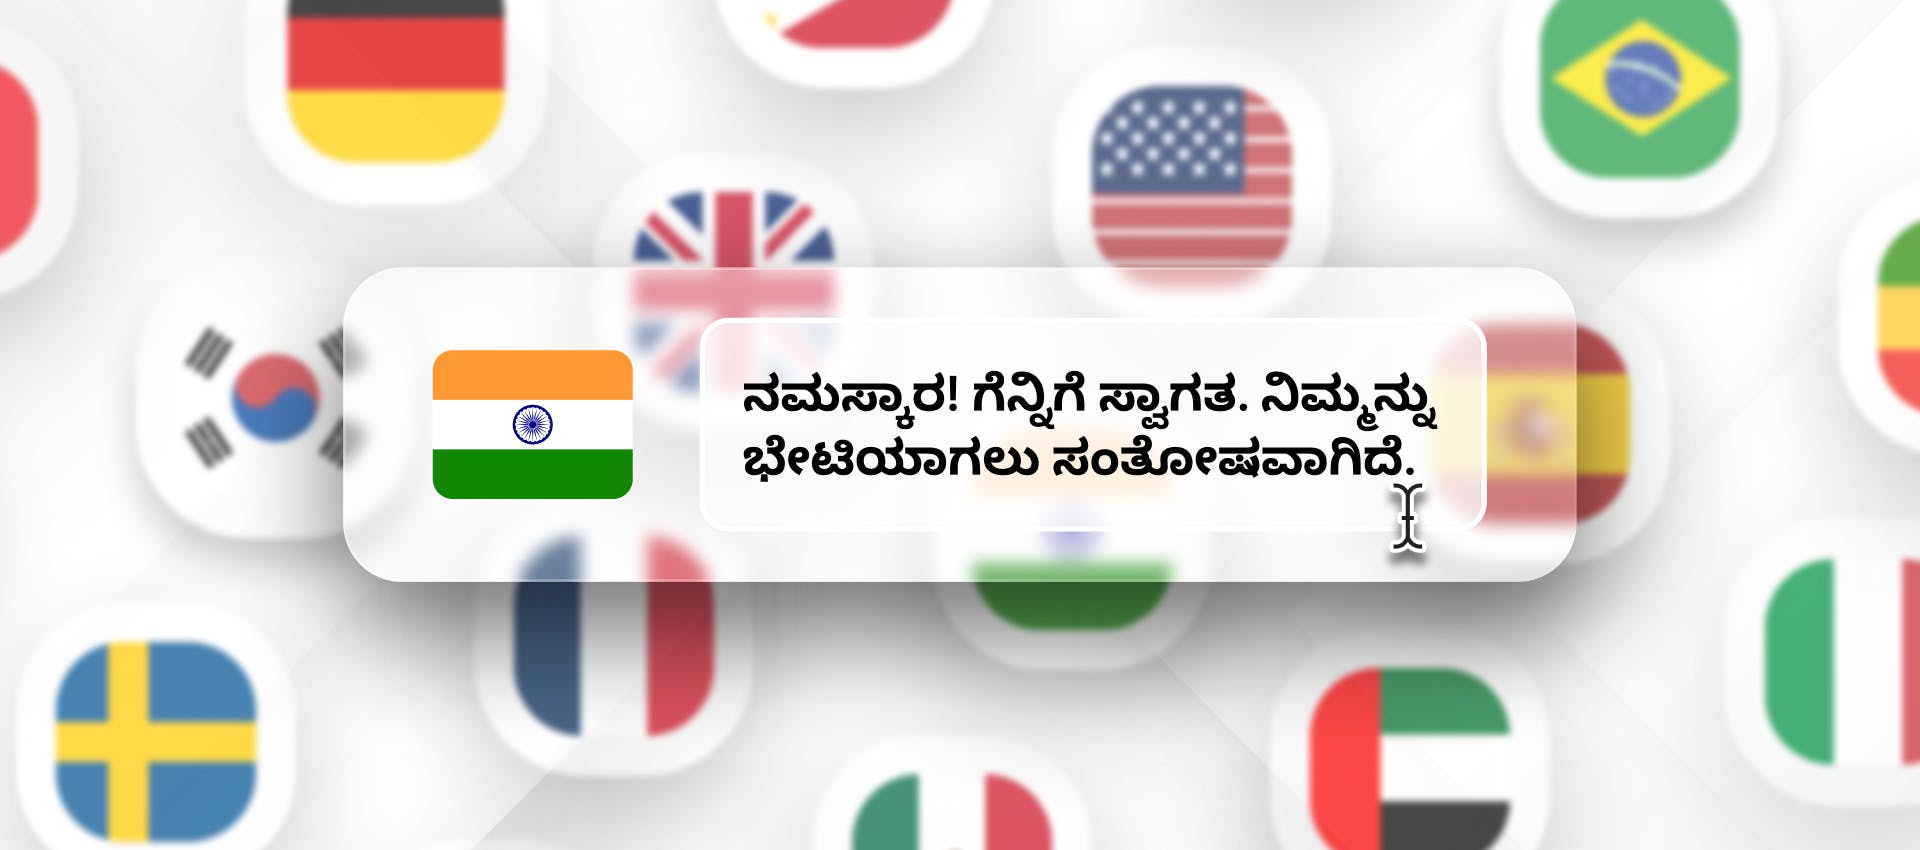 Kannada phrase for Kannada TTS generation with different flags in the background